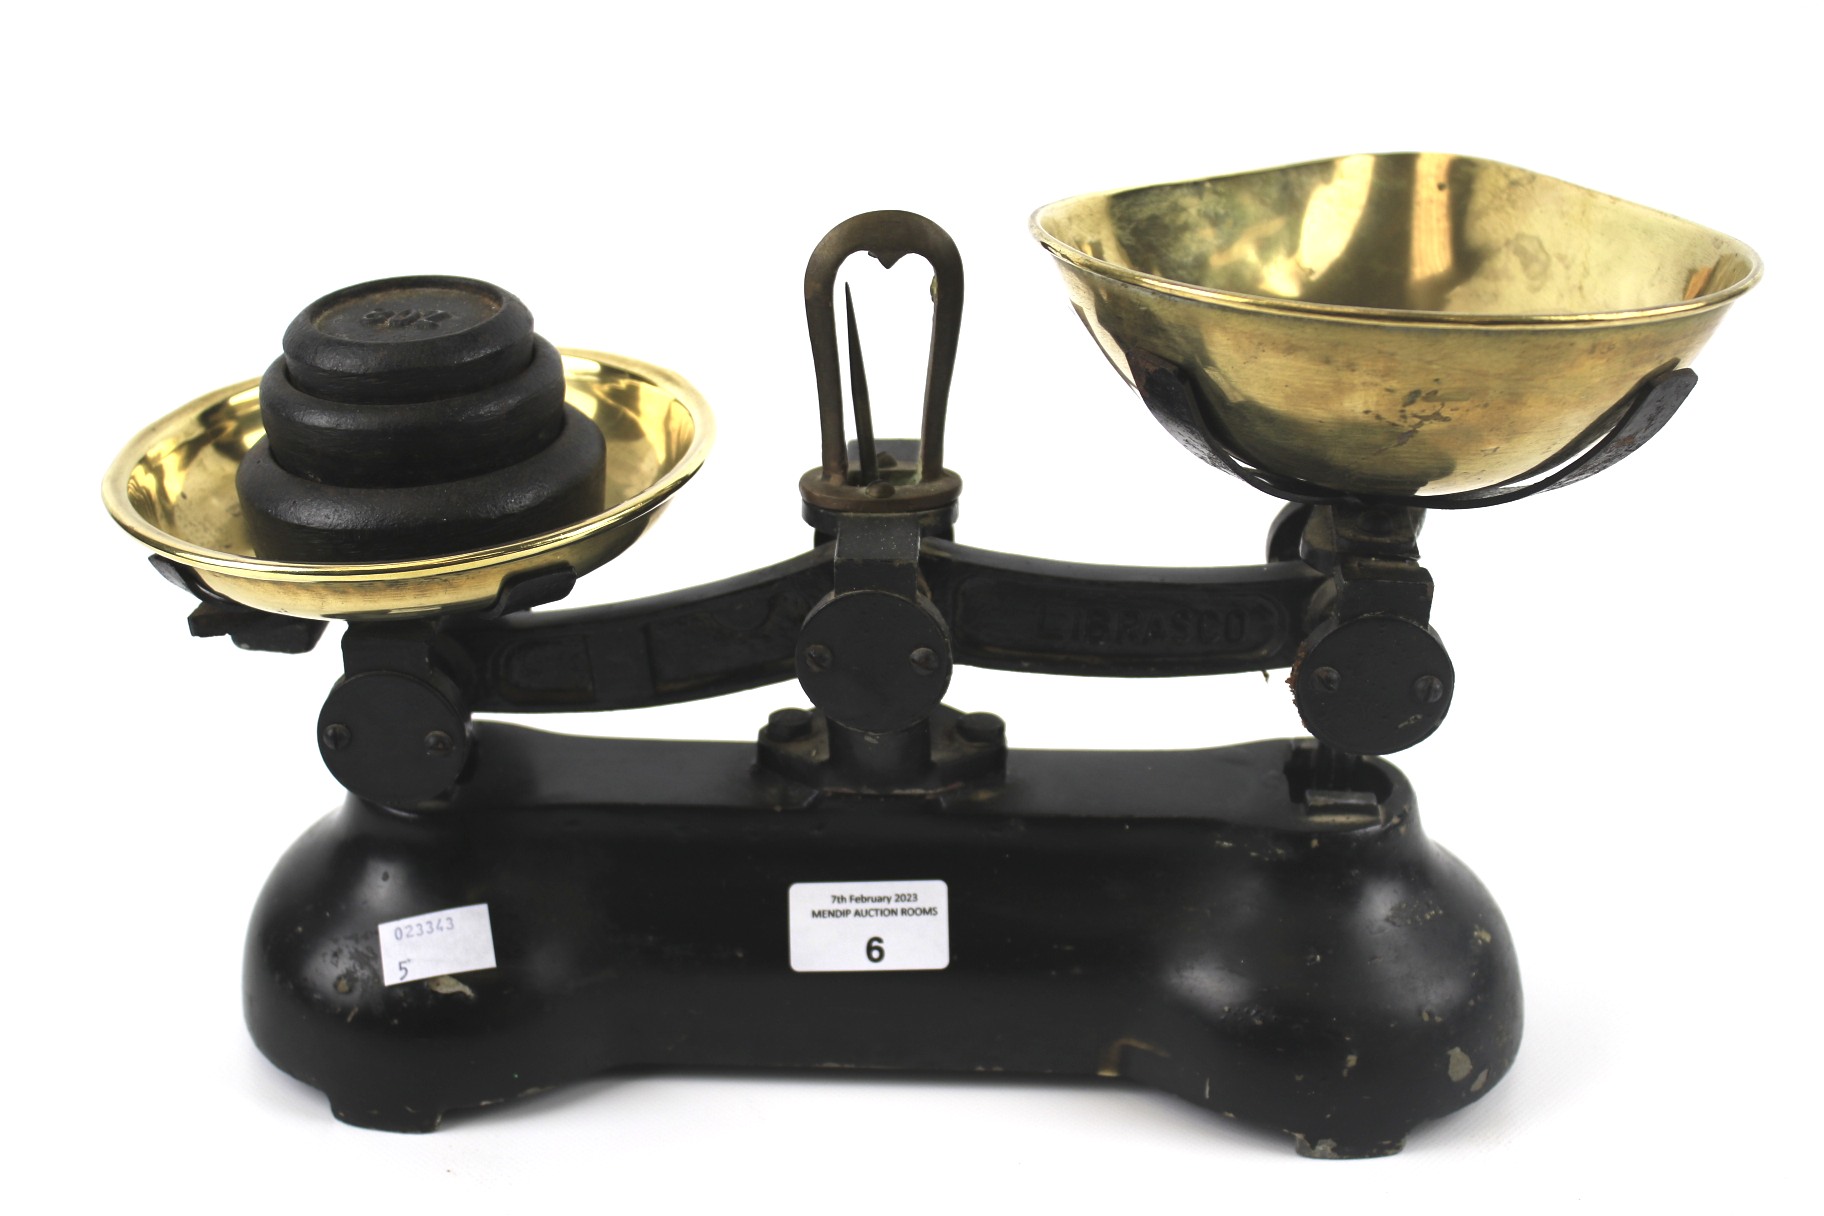 A set of Librasco pan scales and weights.